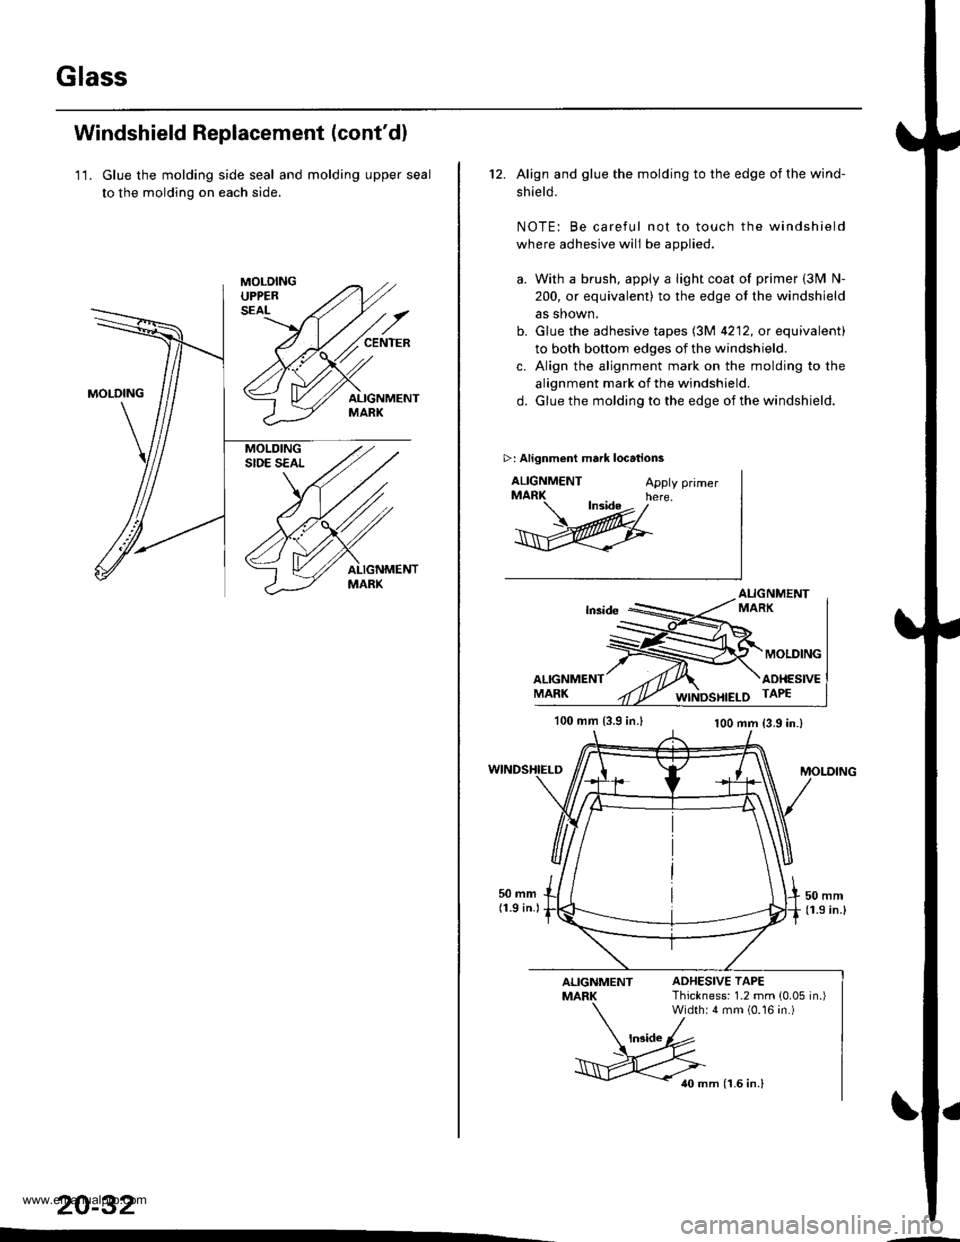 HONDA CR-V 1999 RD1-RD3 / 1.G Workshop Manual 
Glass
Windshield Replacement (contdl
11. Glue the molding side seal and molding upper seal
to the molding on each side.
20-32
12. Align and glue the molding to the edge of the wind-
shield.
NOTE: Be